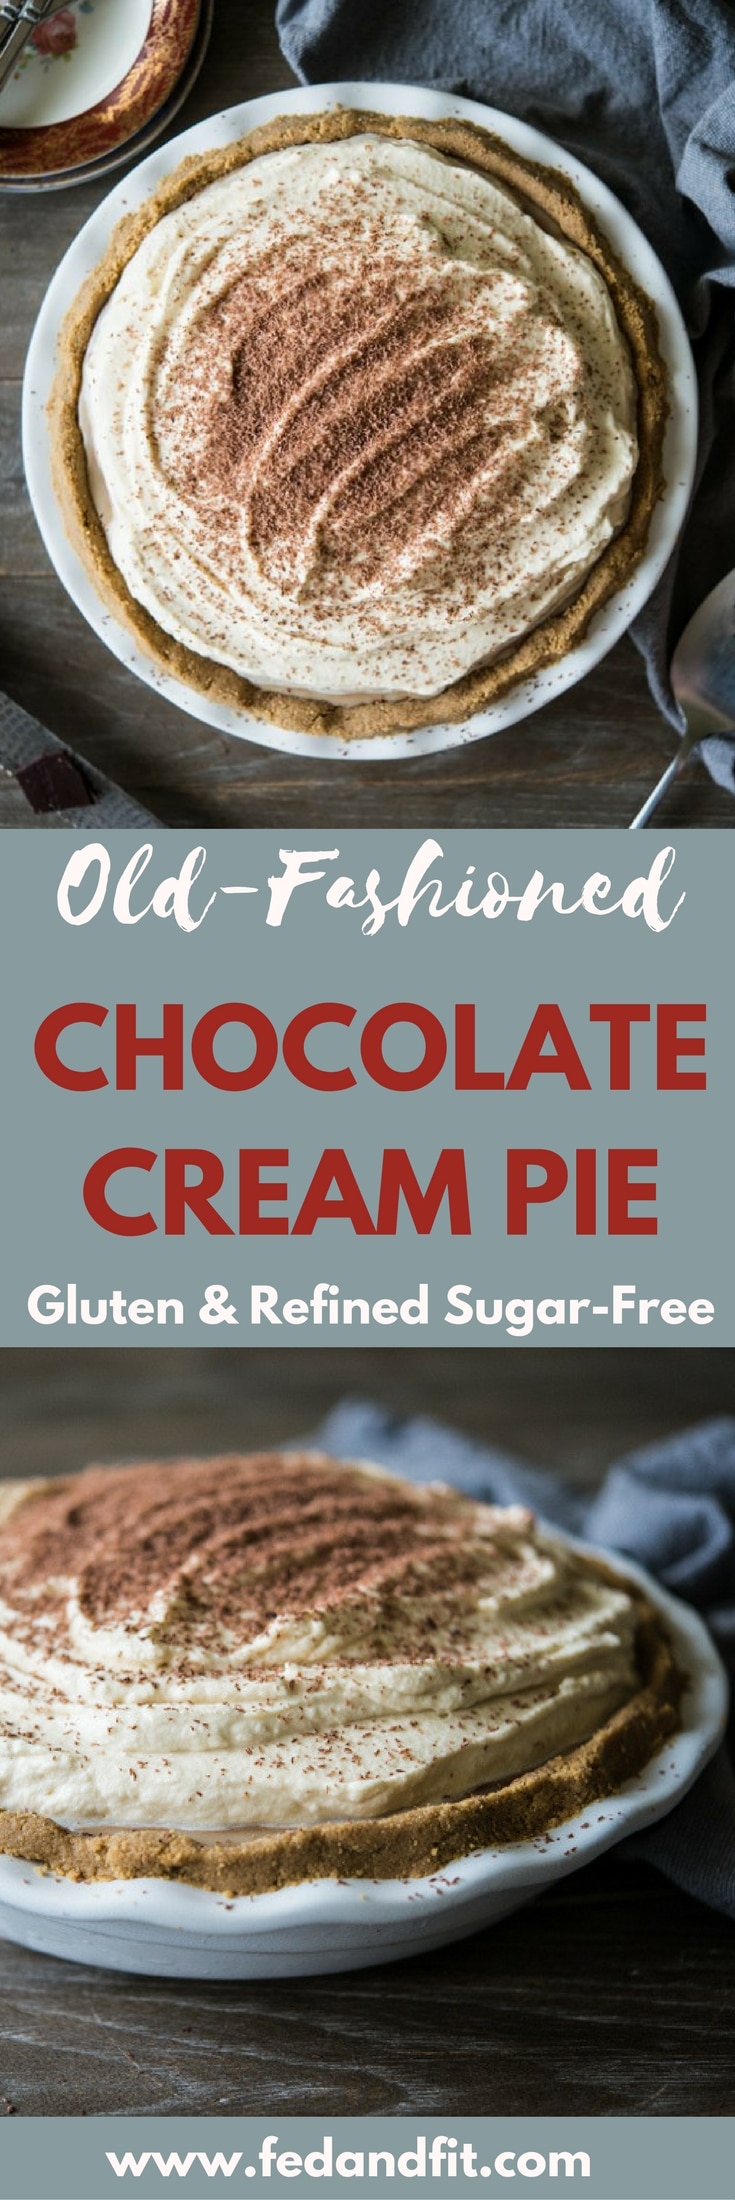 This easy, 7-ingredient chocolate pie is gluten and refined sugar-free and still incredibly rich and delicious. It is the perfect side dish for your Thanksgiving or holiday table!